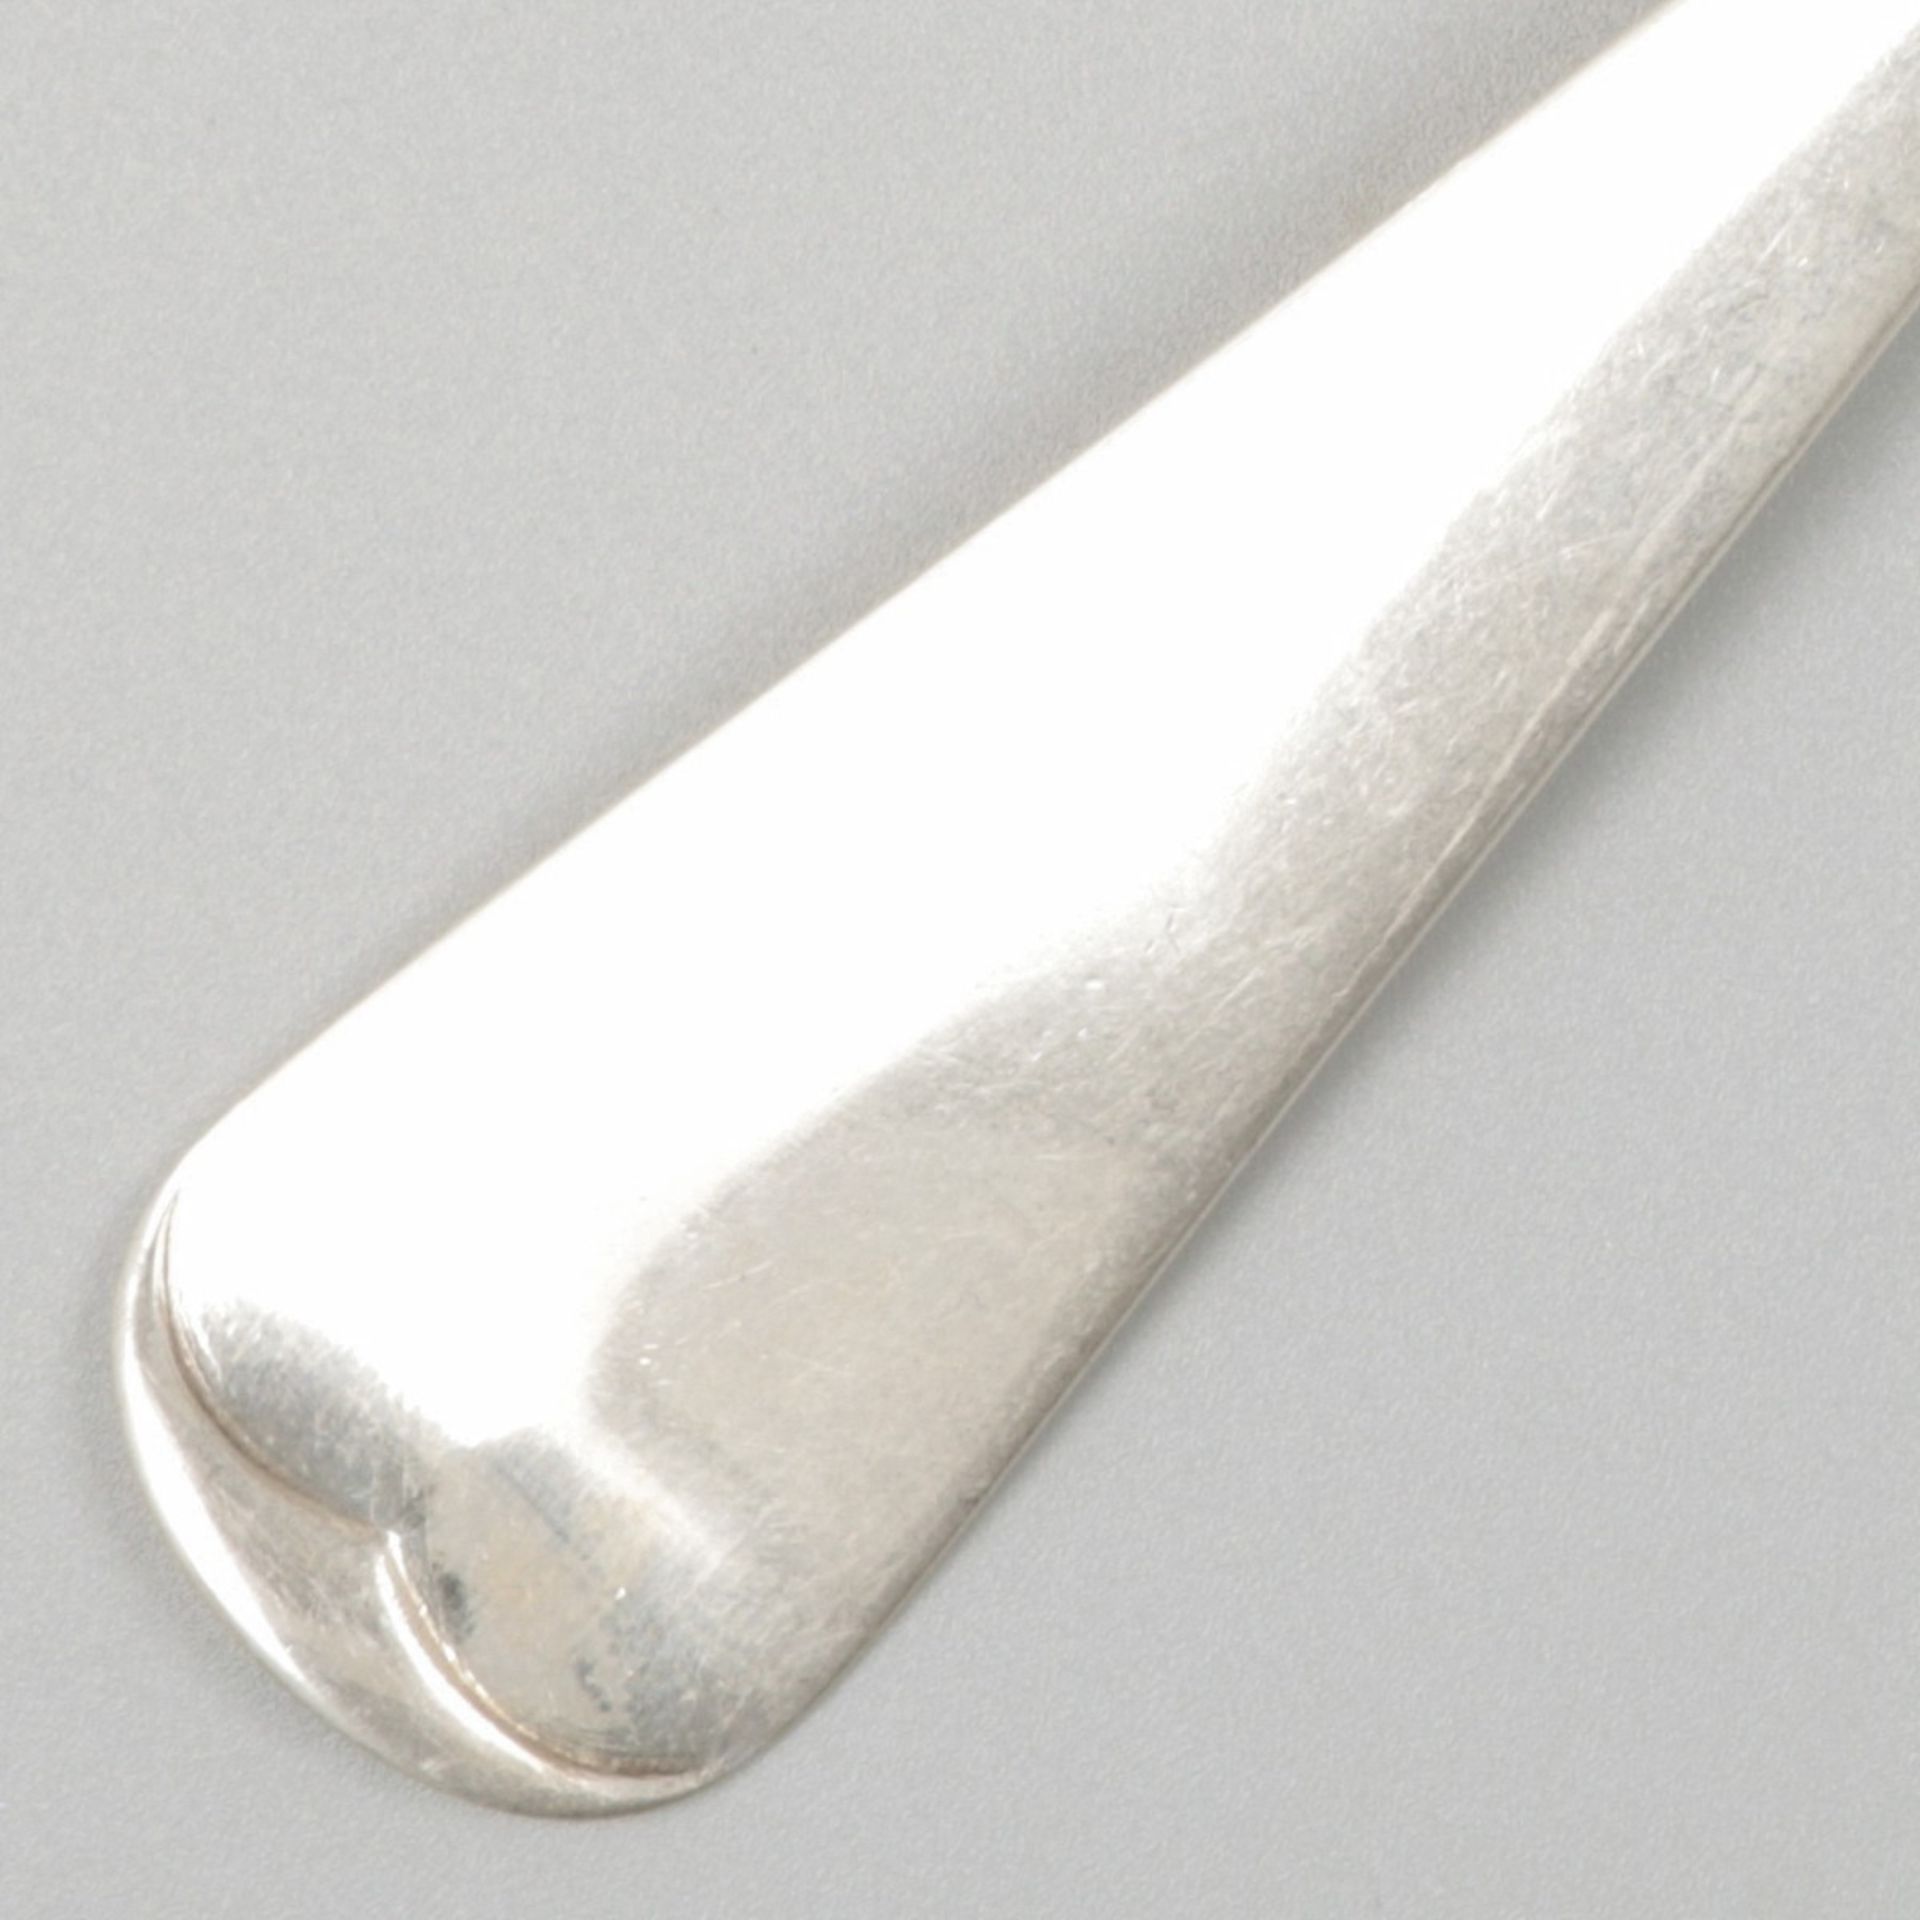 Salad servers ''Haags Lofje'' silver. - Image 3 of 9